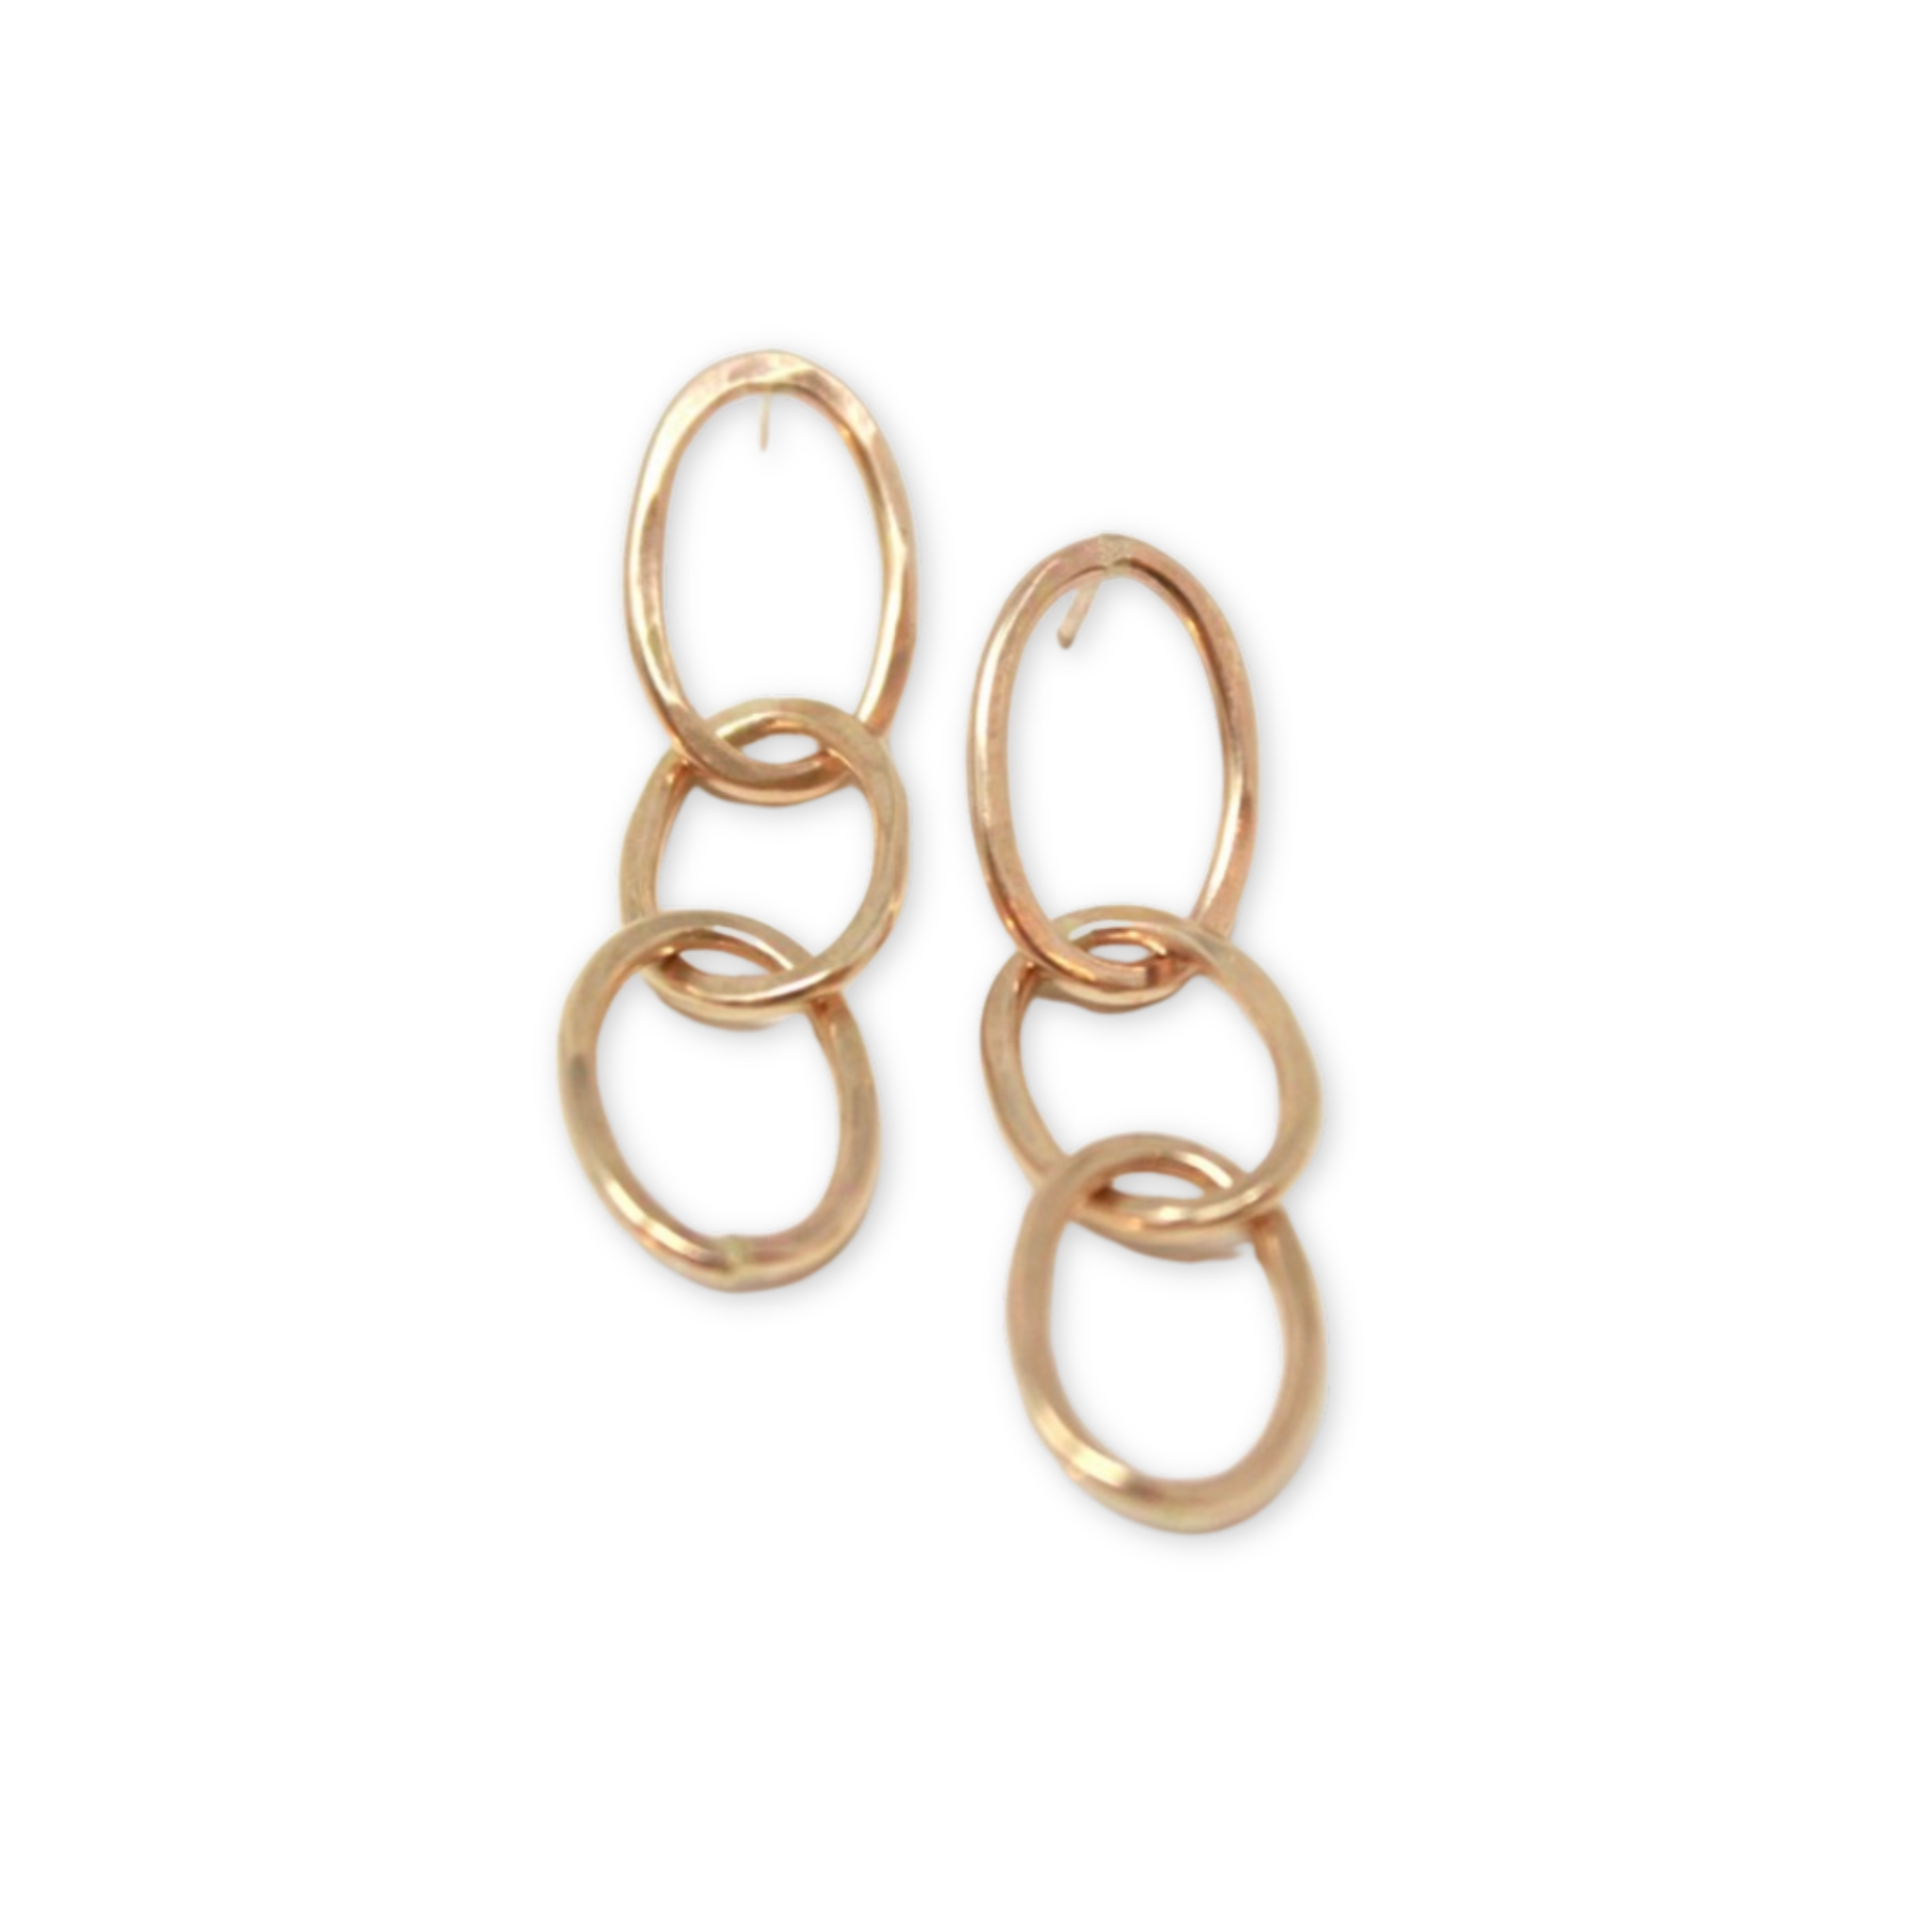 earrings featuring three hand forged and interlaced ovals that dangle from a post